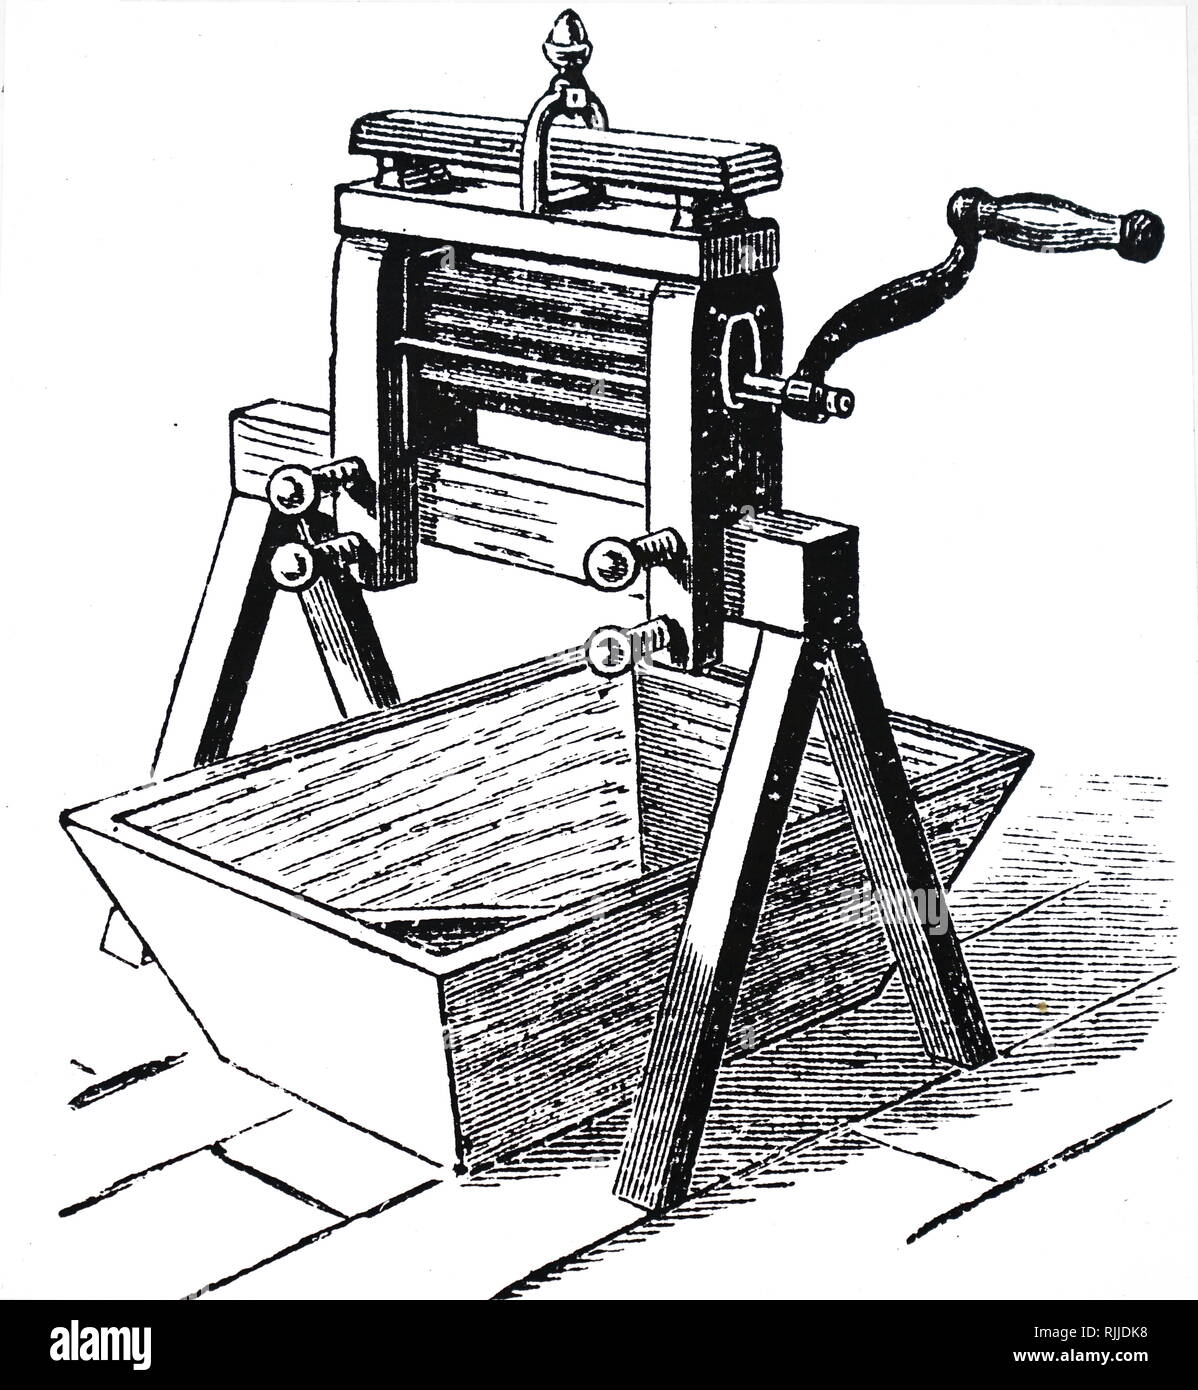 An engraving depicting a wringer or mangle used to express water. Dated 19th century Stock Photo